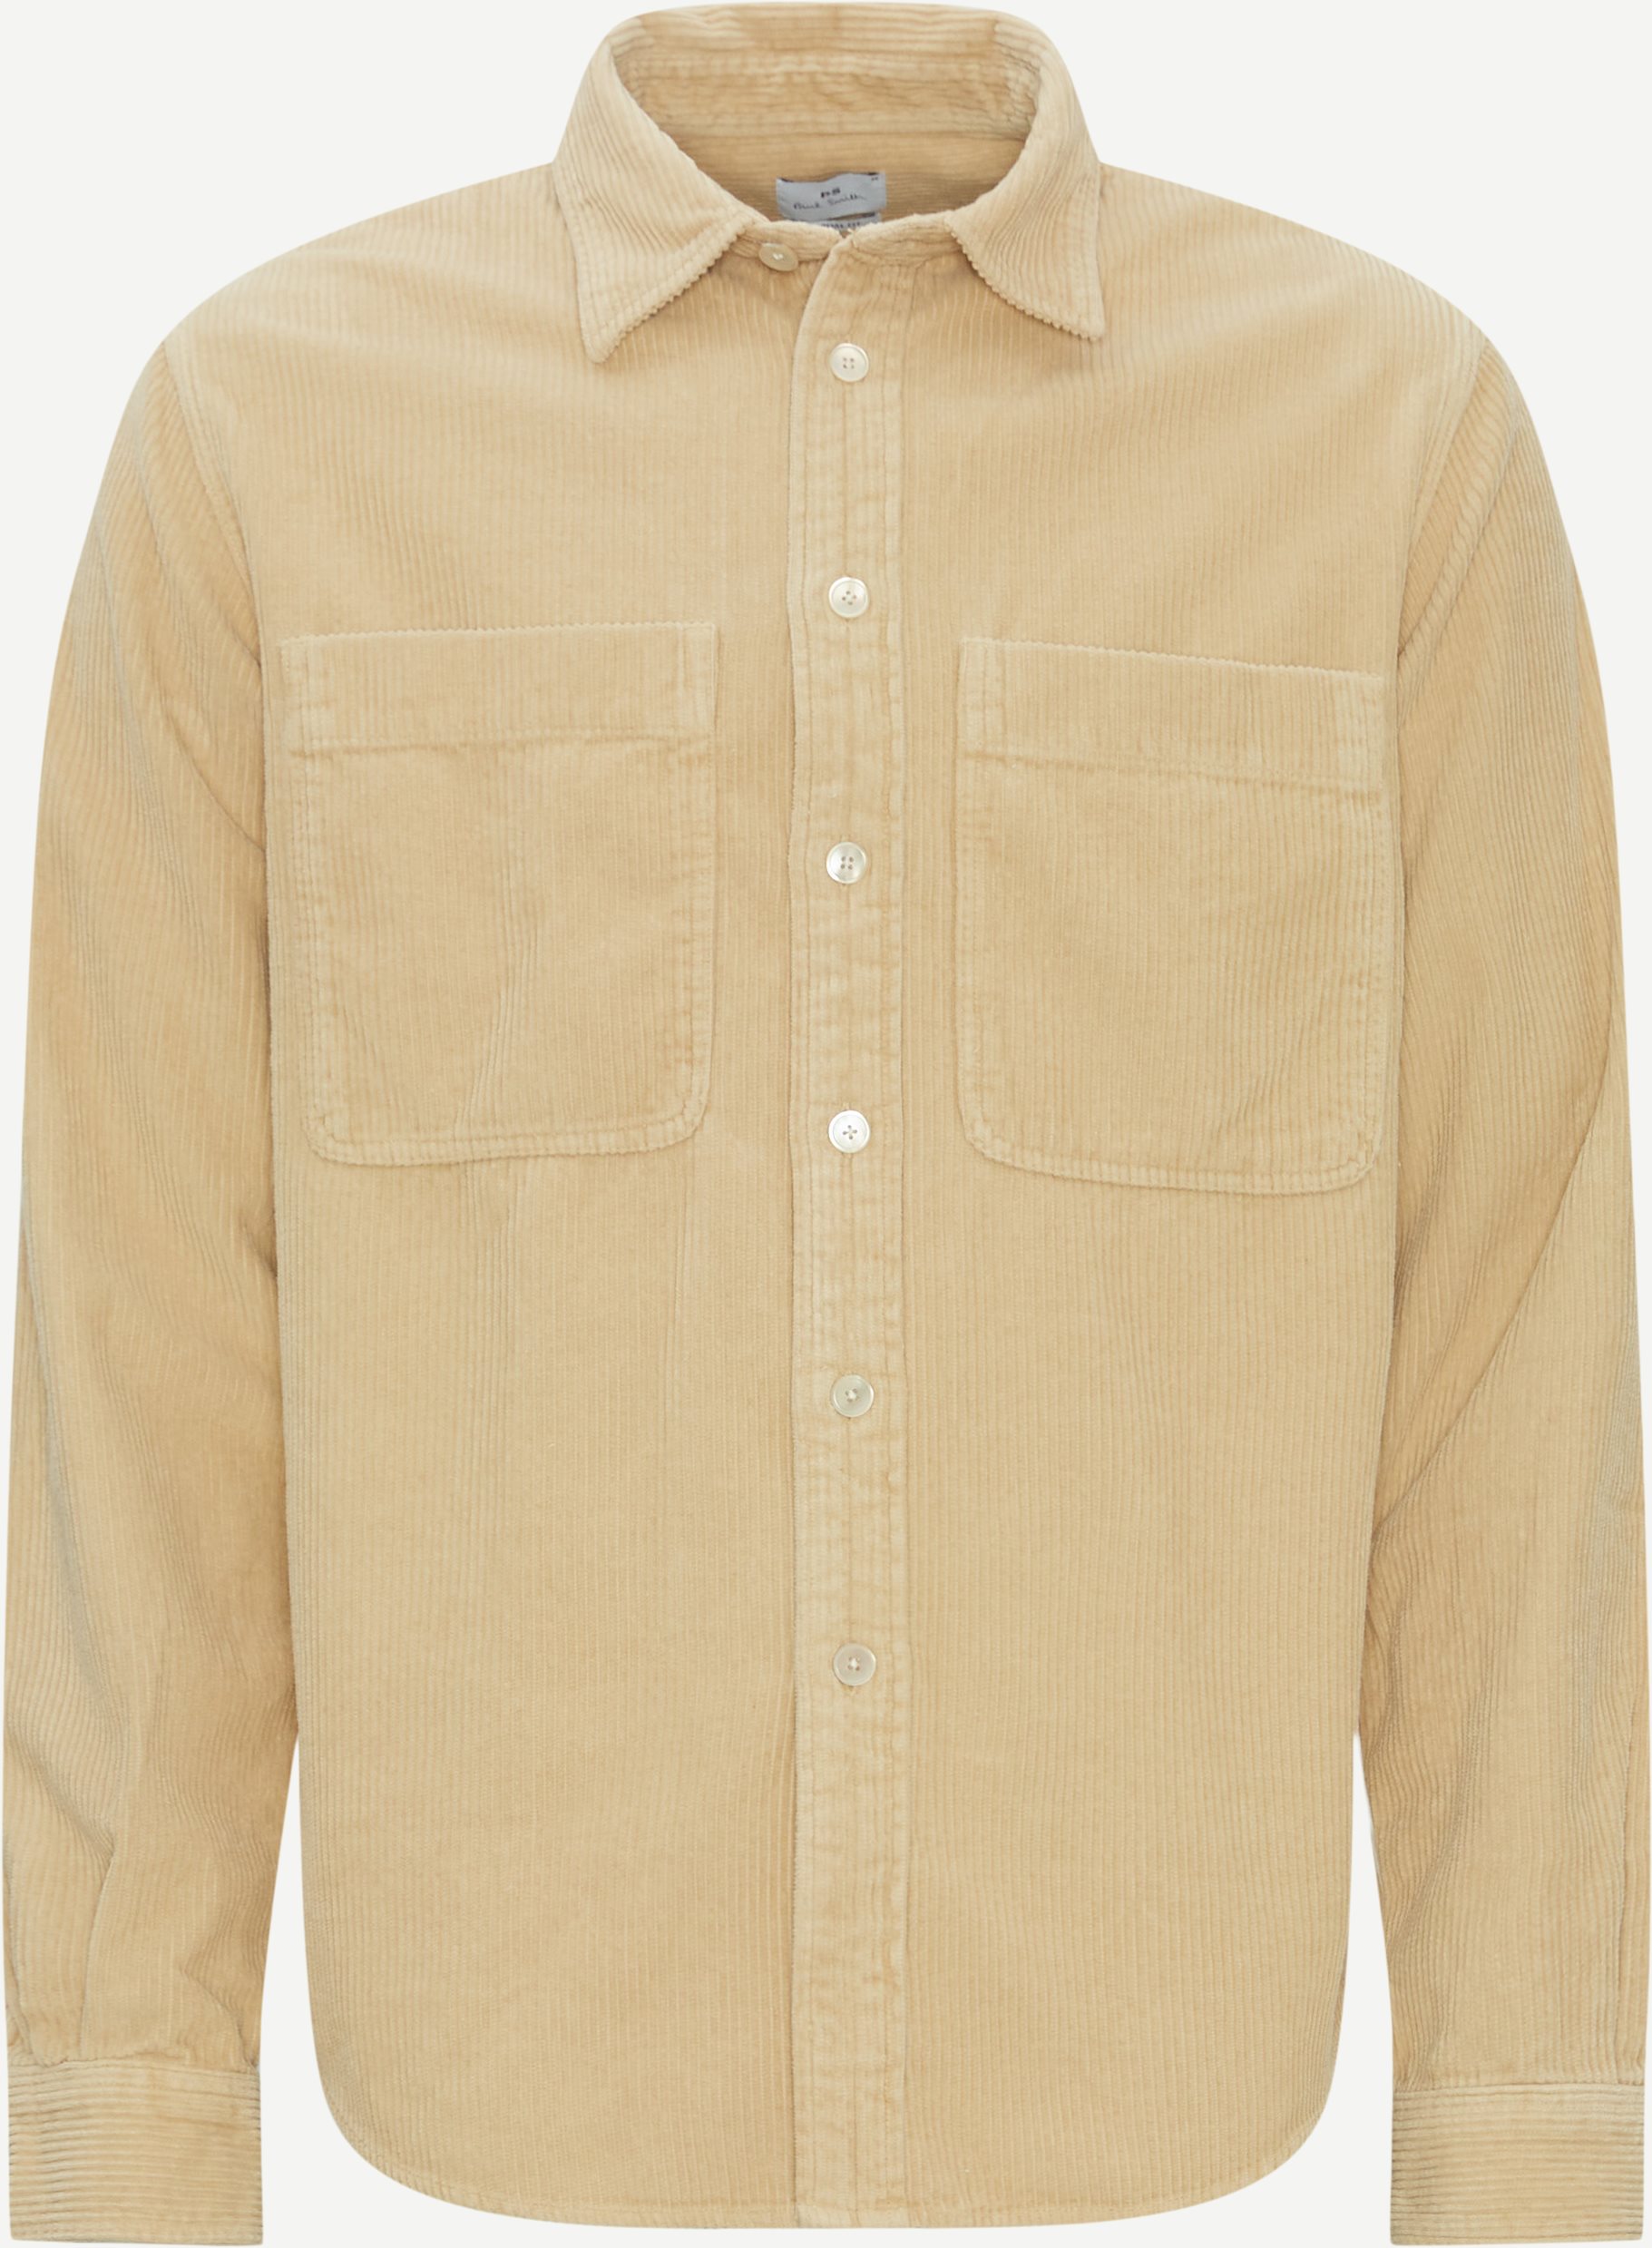 PS Paul Smith Shirts 450Y-M21950 MENS LS CASUAL FIT SHIRT Sand